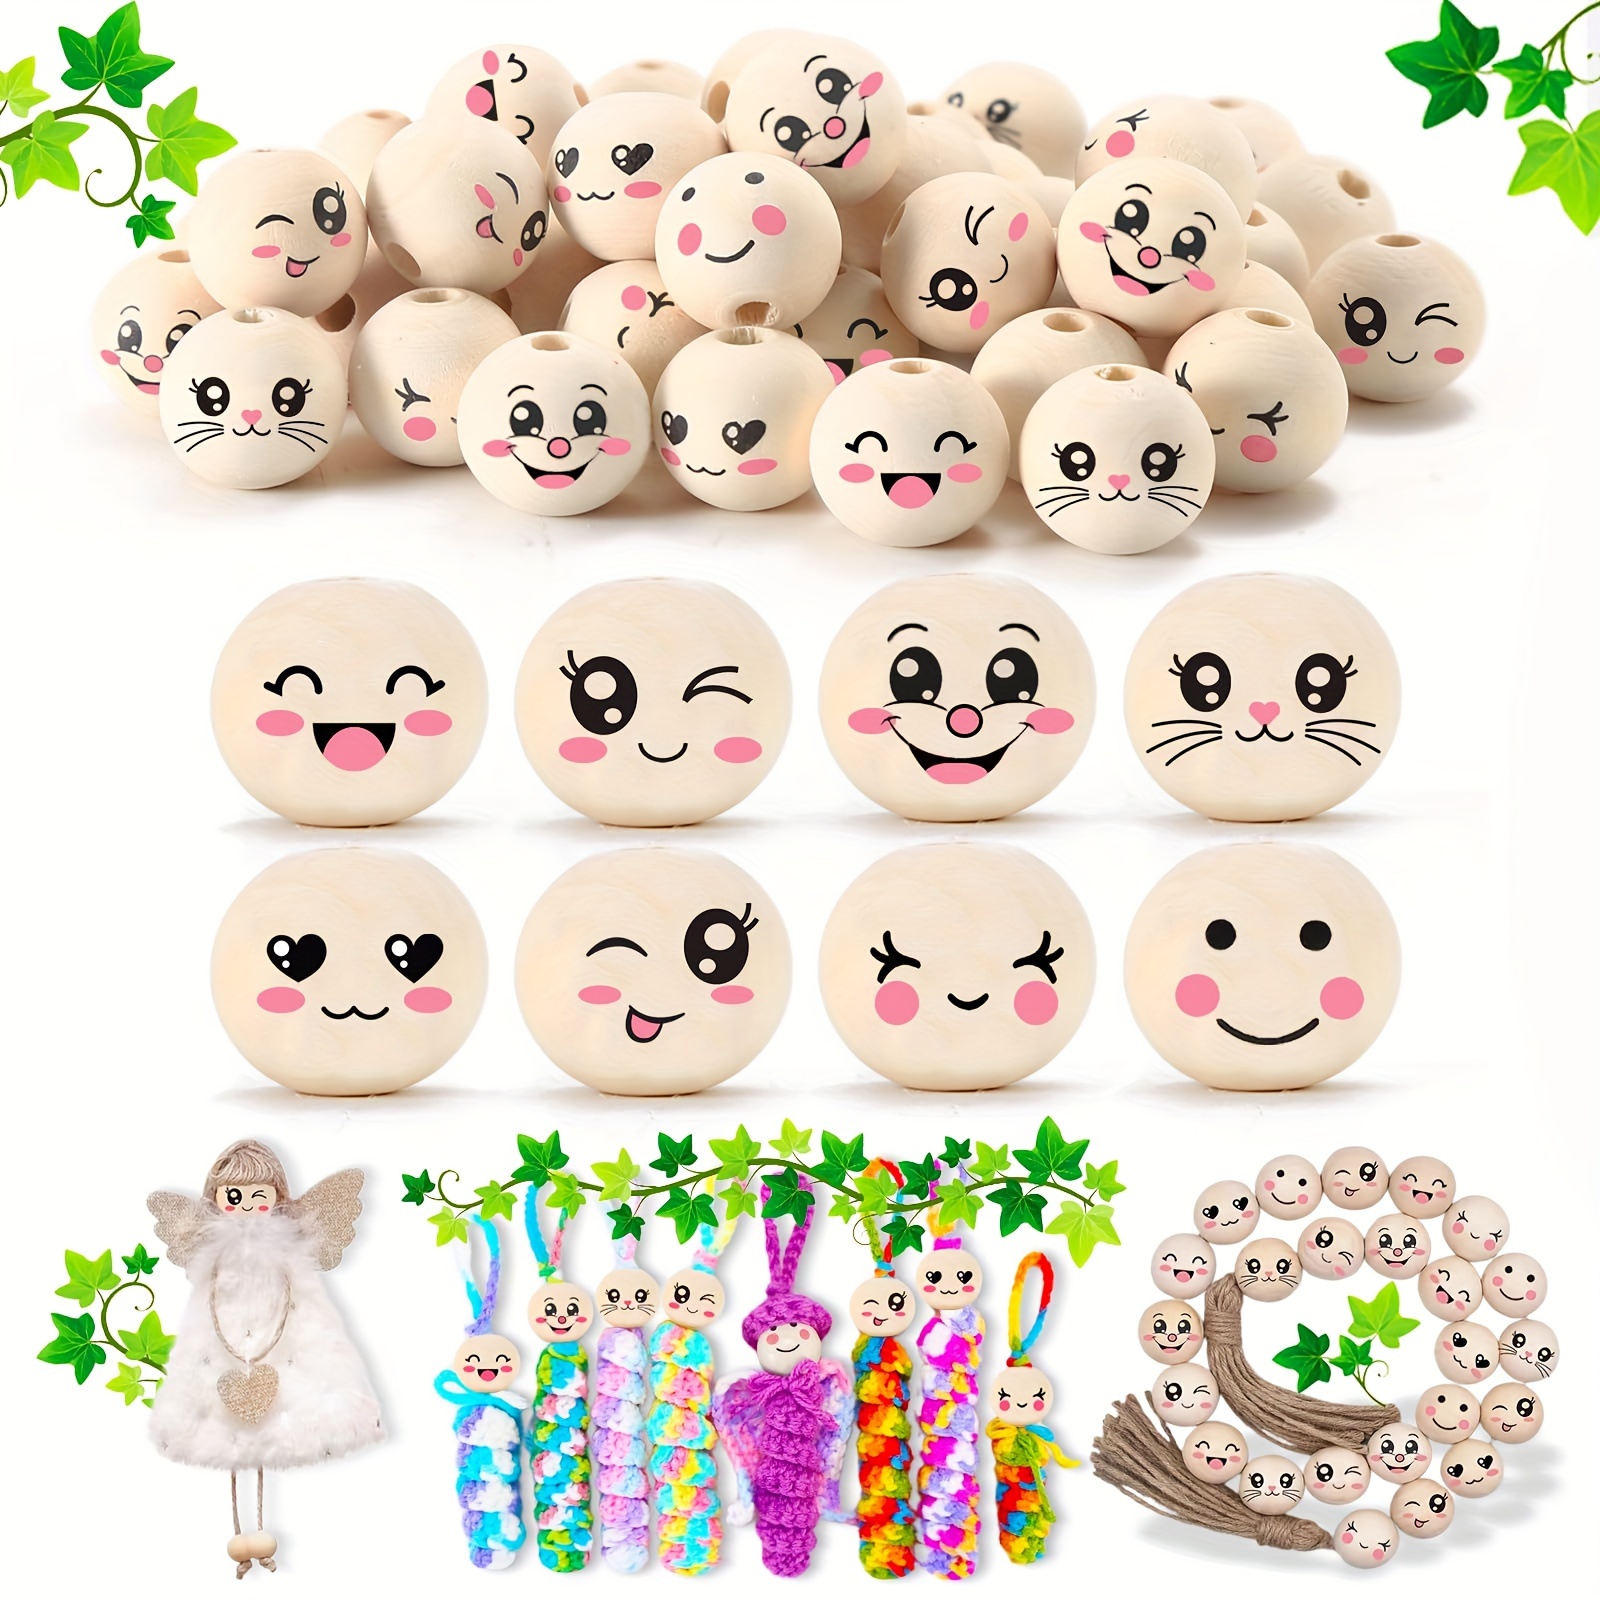 

80pcs 8 Styles Wooden Smiling Faces Balls 20mm Beads With Holes For Diy Crochet Crafts Keychains Other Special Beaded Decors Accessories